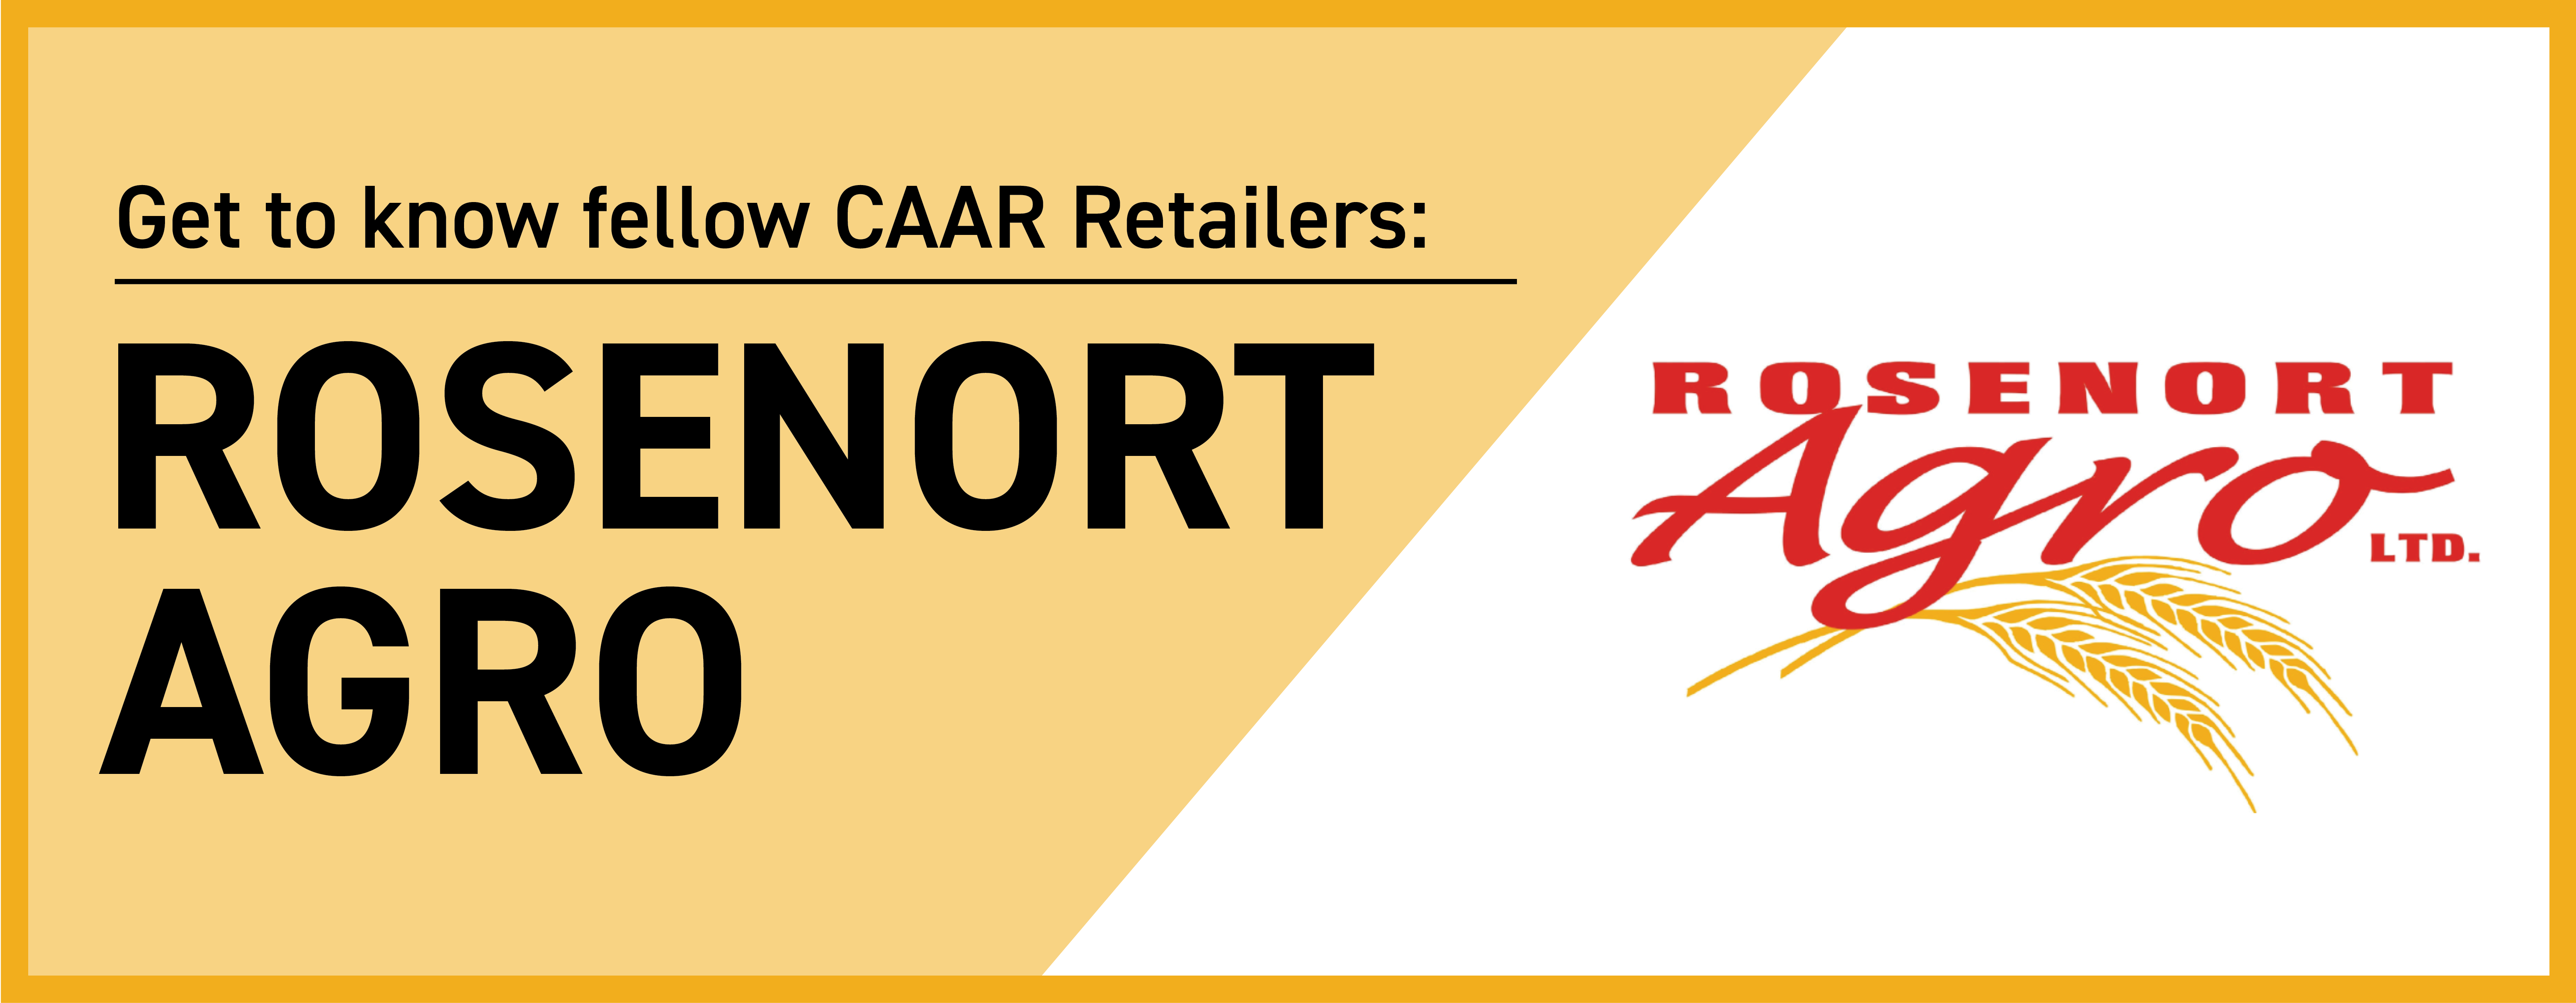 Banner for Get to know fellow CAAR Retailers